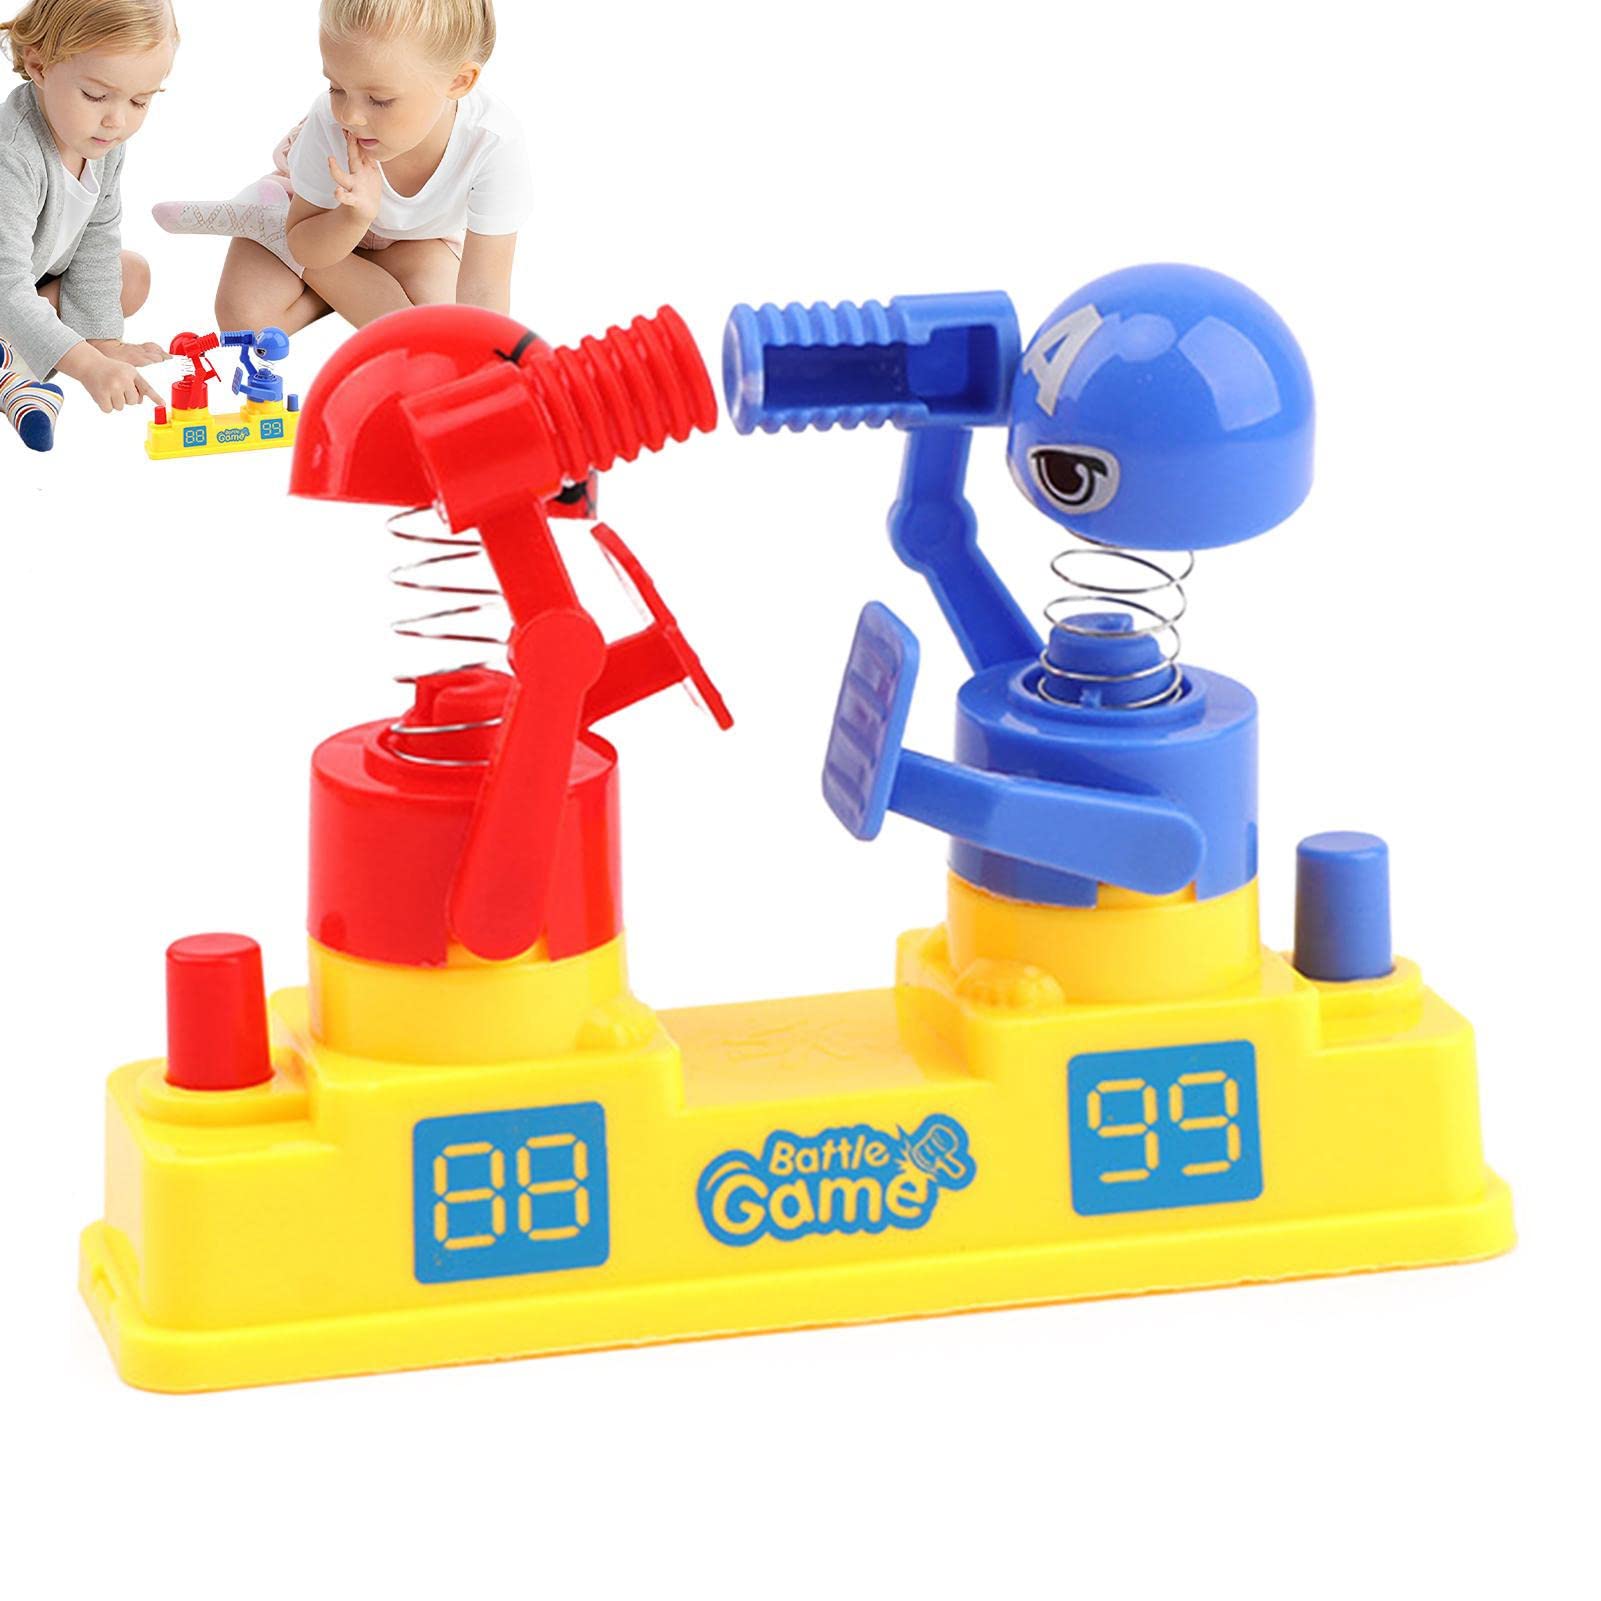 PixCy Robot Table Wrestling Game, Mini Robot Fighting Toy Battle Old Game, Portable Fighting Robot Boxing Toy Battle Bot Interactive, Robot Punching Boxer Playset for Kids